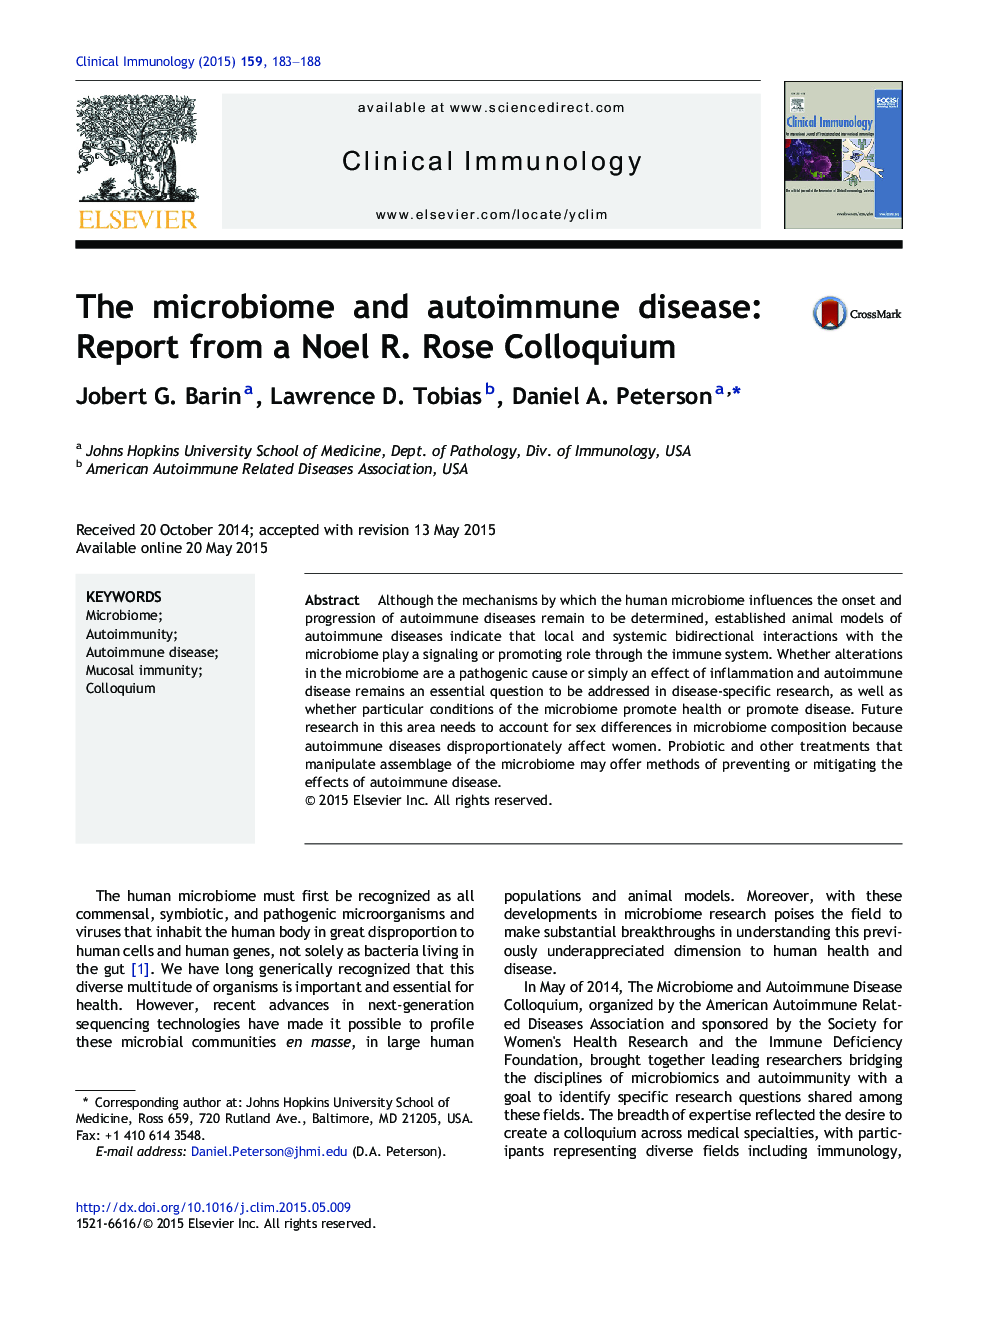 The microbiome and autoimmune disease: Report from a Noel R. Rose Colloquium